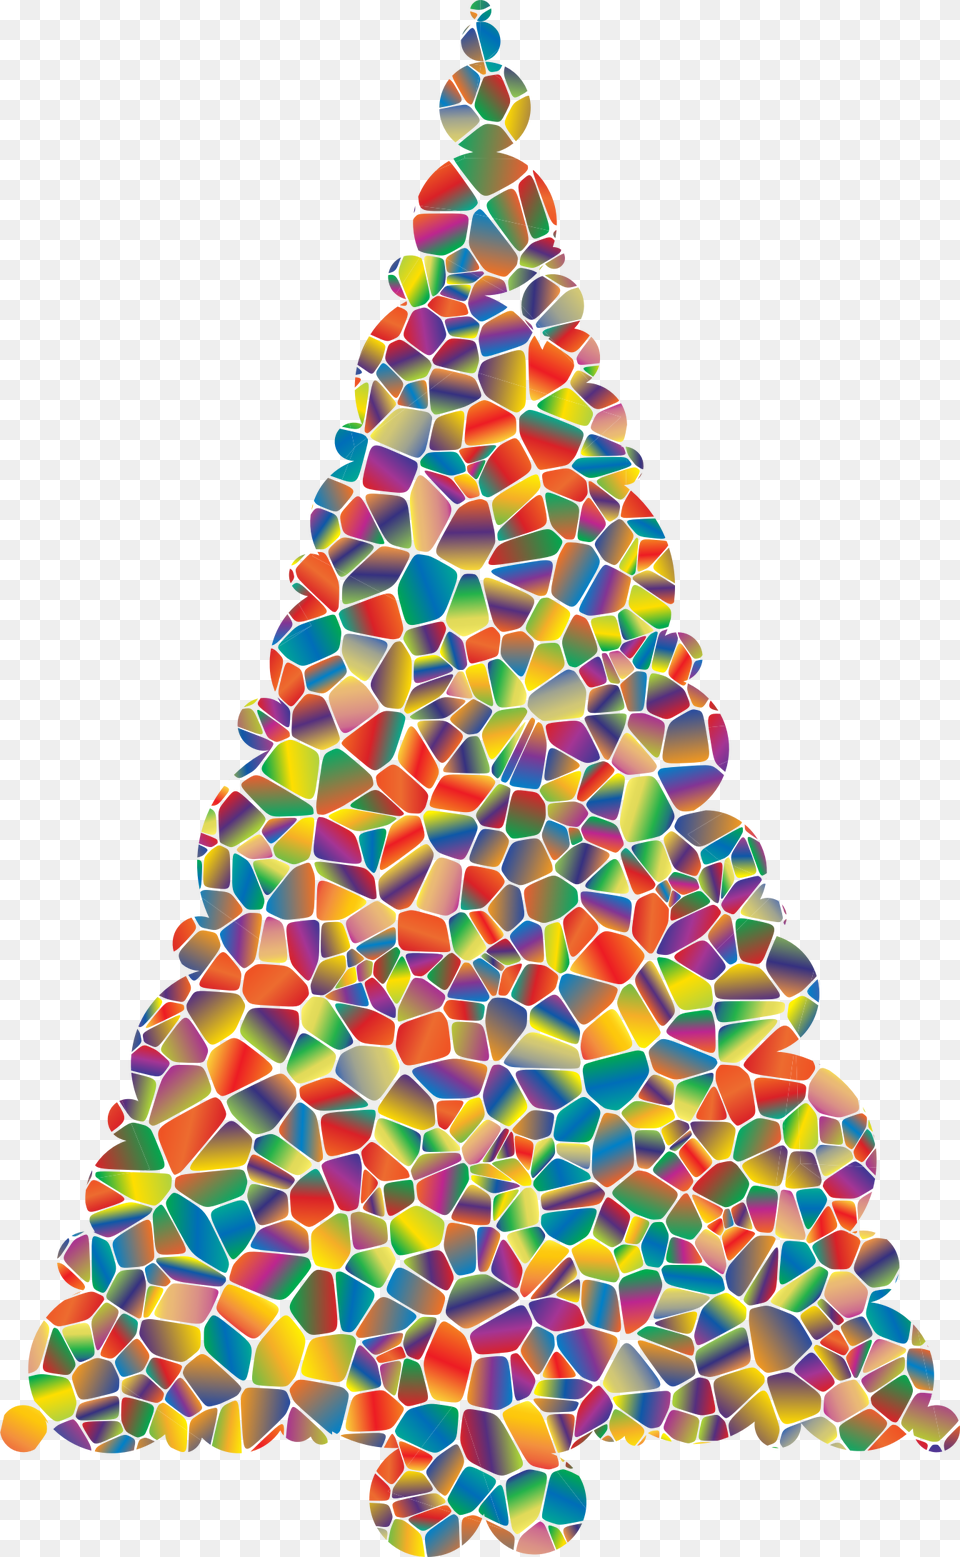 Polyprismatic Tiled Christmas Tree Clip Arts Tiled Christmas Tree, Triangle, Christmas Decorations, Festival, Christmas Tree Free Png Download